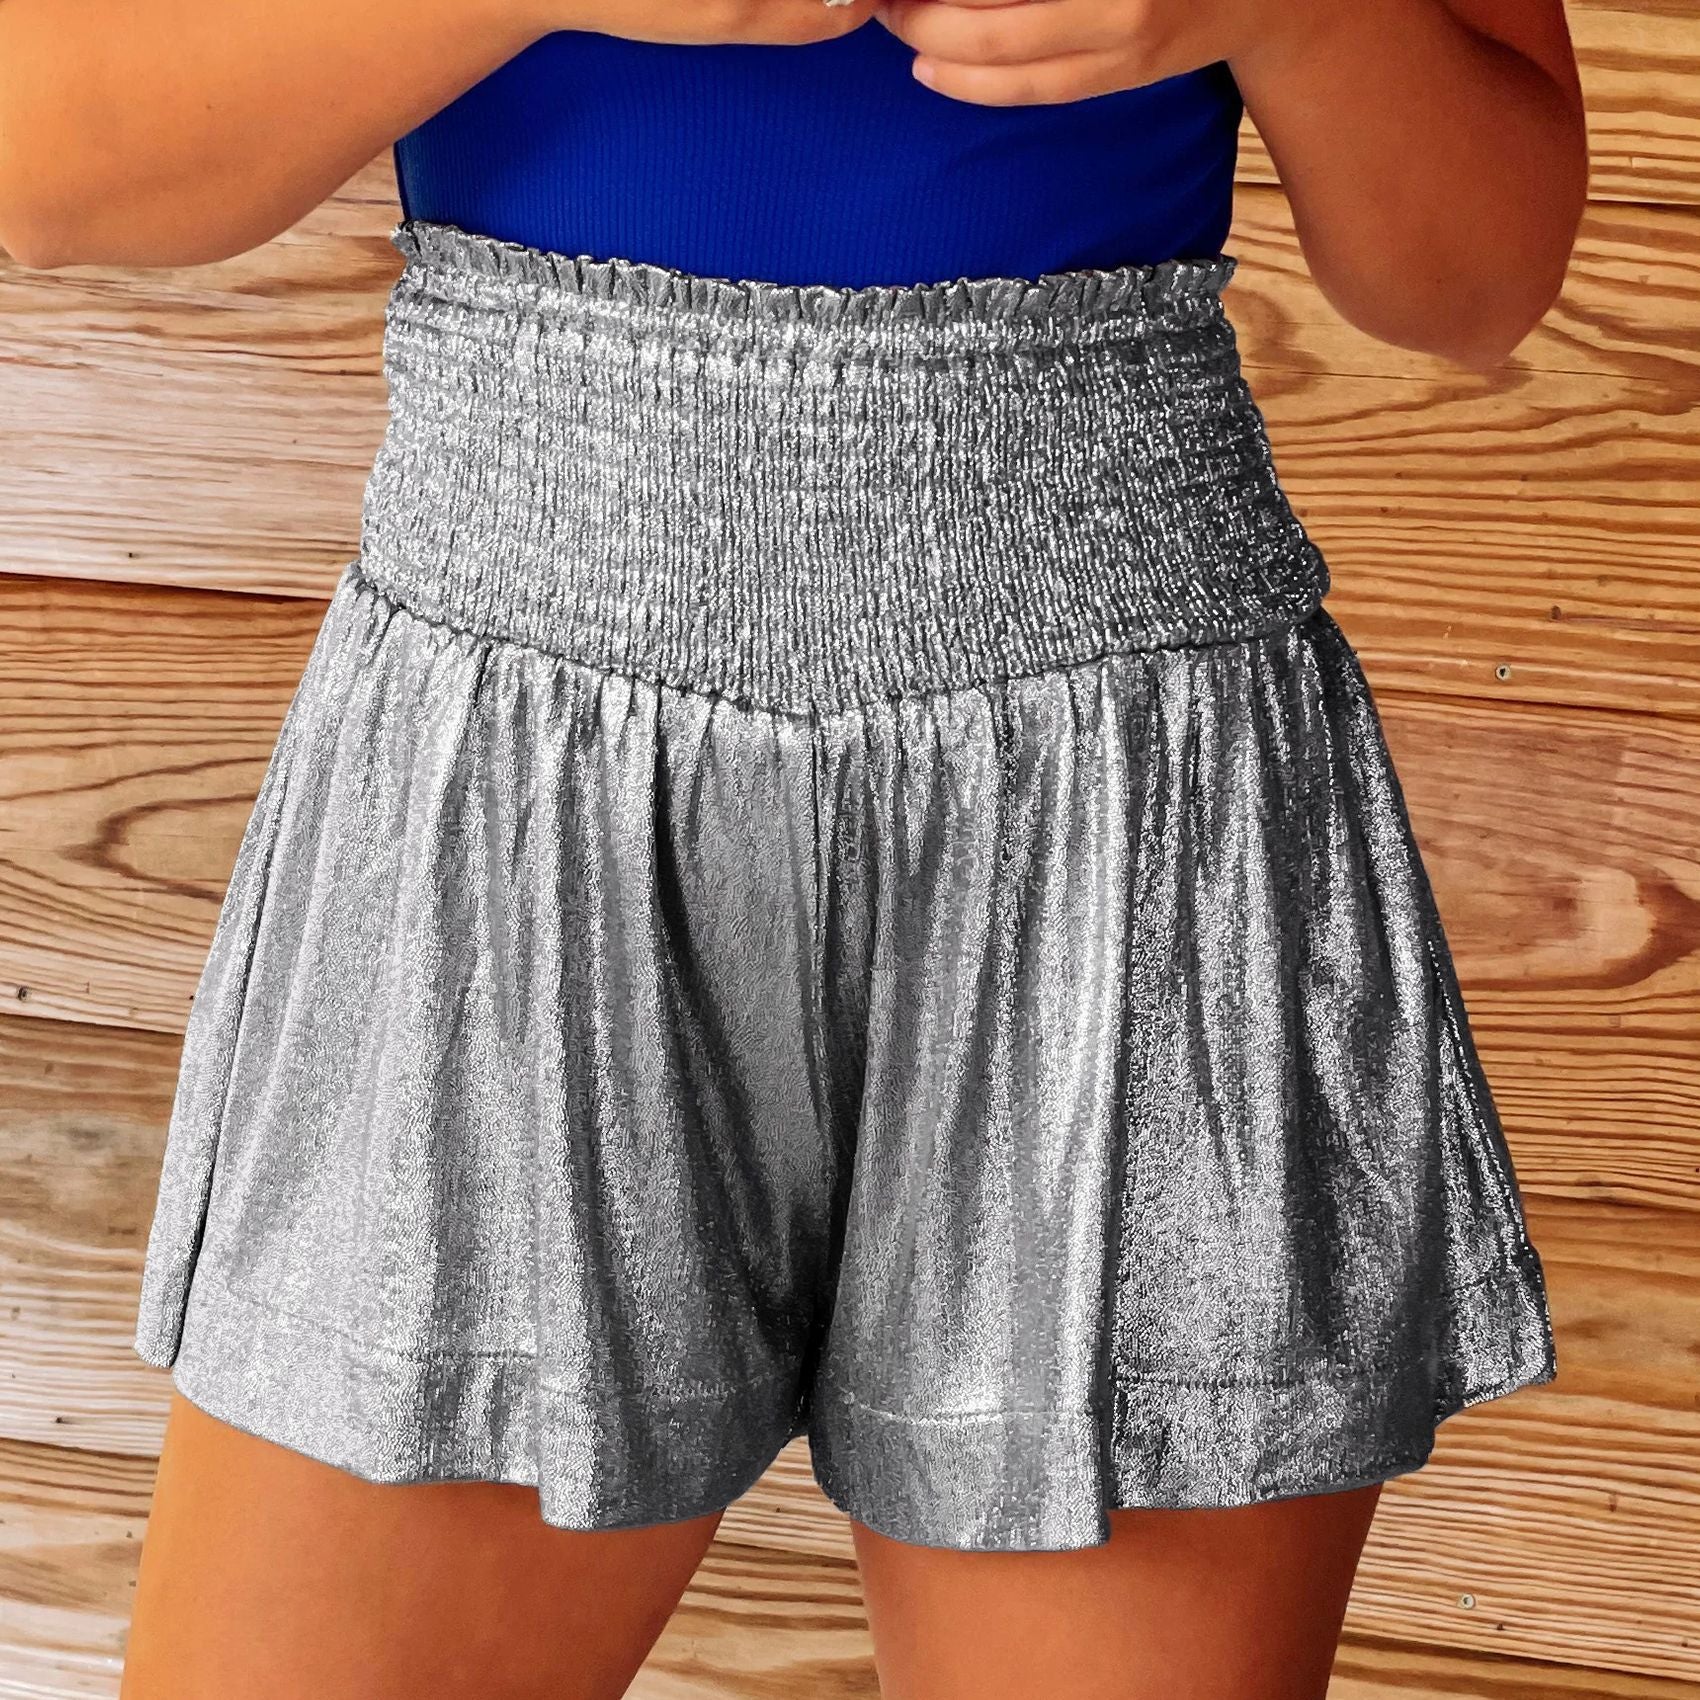 Casual wear shorts, perfect for relaxed and comfortable dressing during leisure activities.